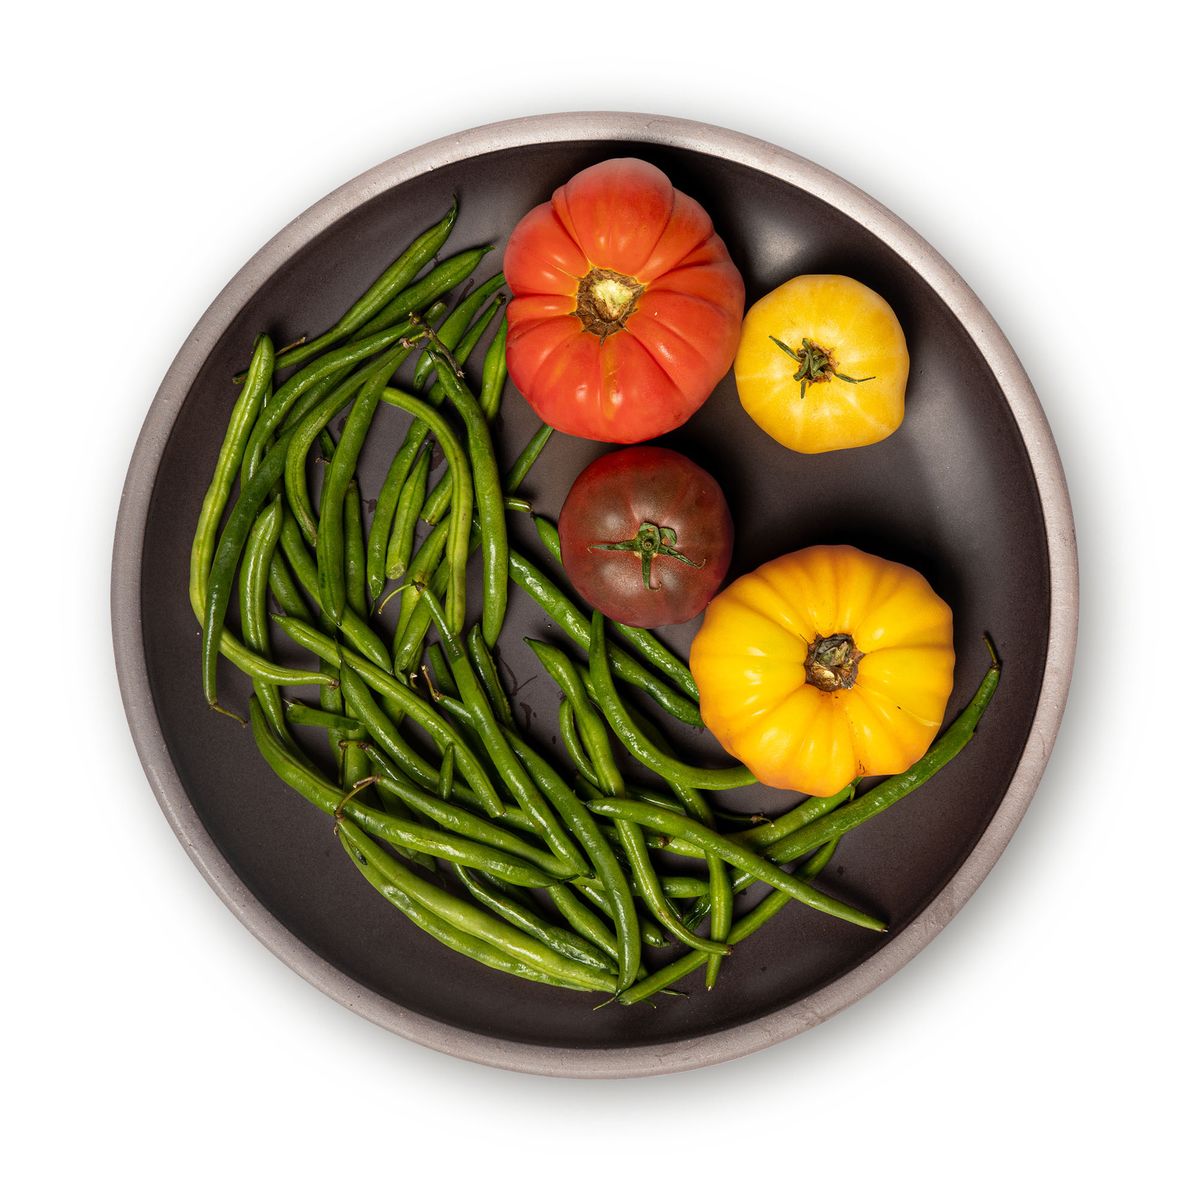 Vegetables on a large ceramic platter in a dark cool brown color featuring iron speckles and an unglazed rim